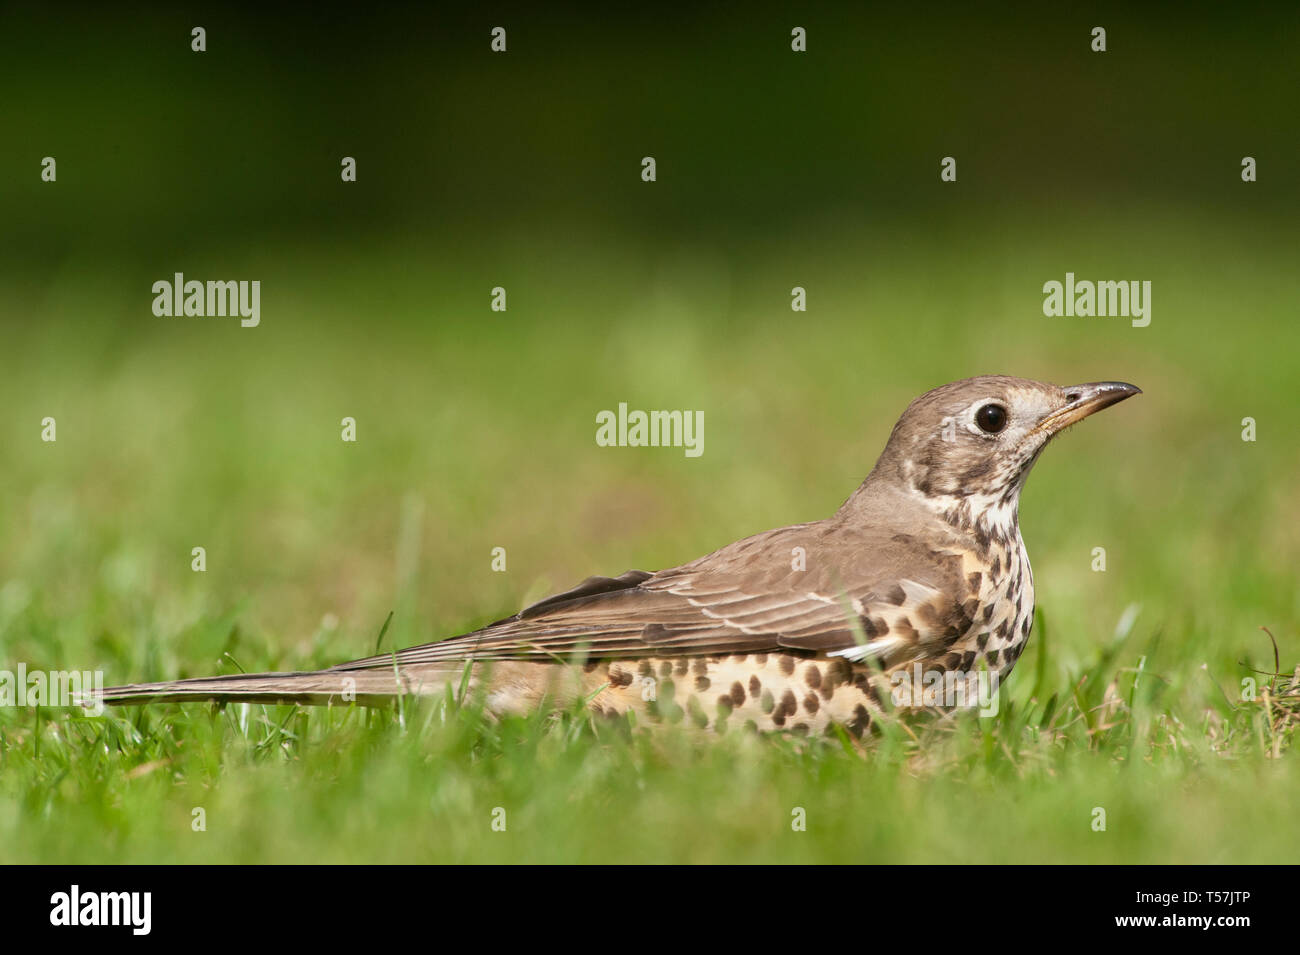 Alarmed by a passing Magpie, a Mistle Thrush, Turdus viscivorus, lies down low in grass, Queen's Park, London, United Kingdom Stock Photo